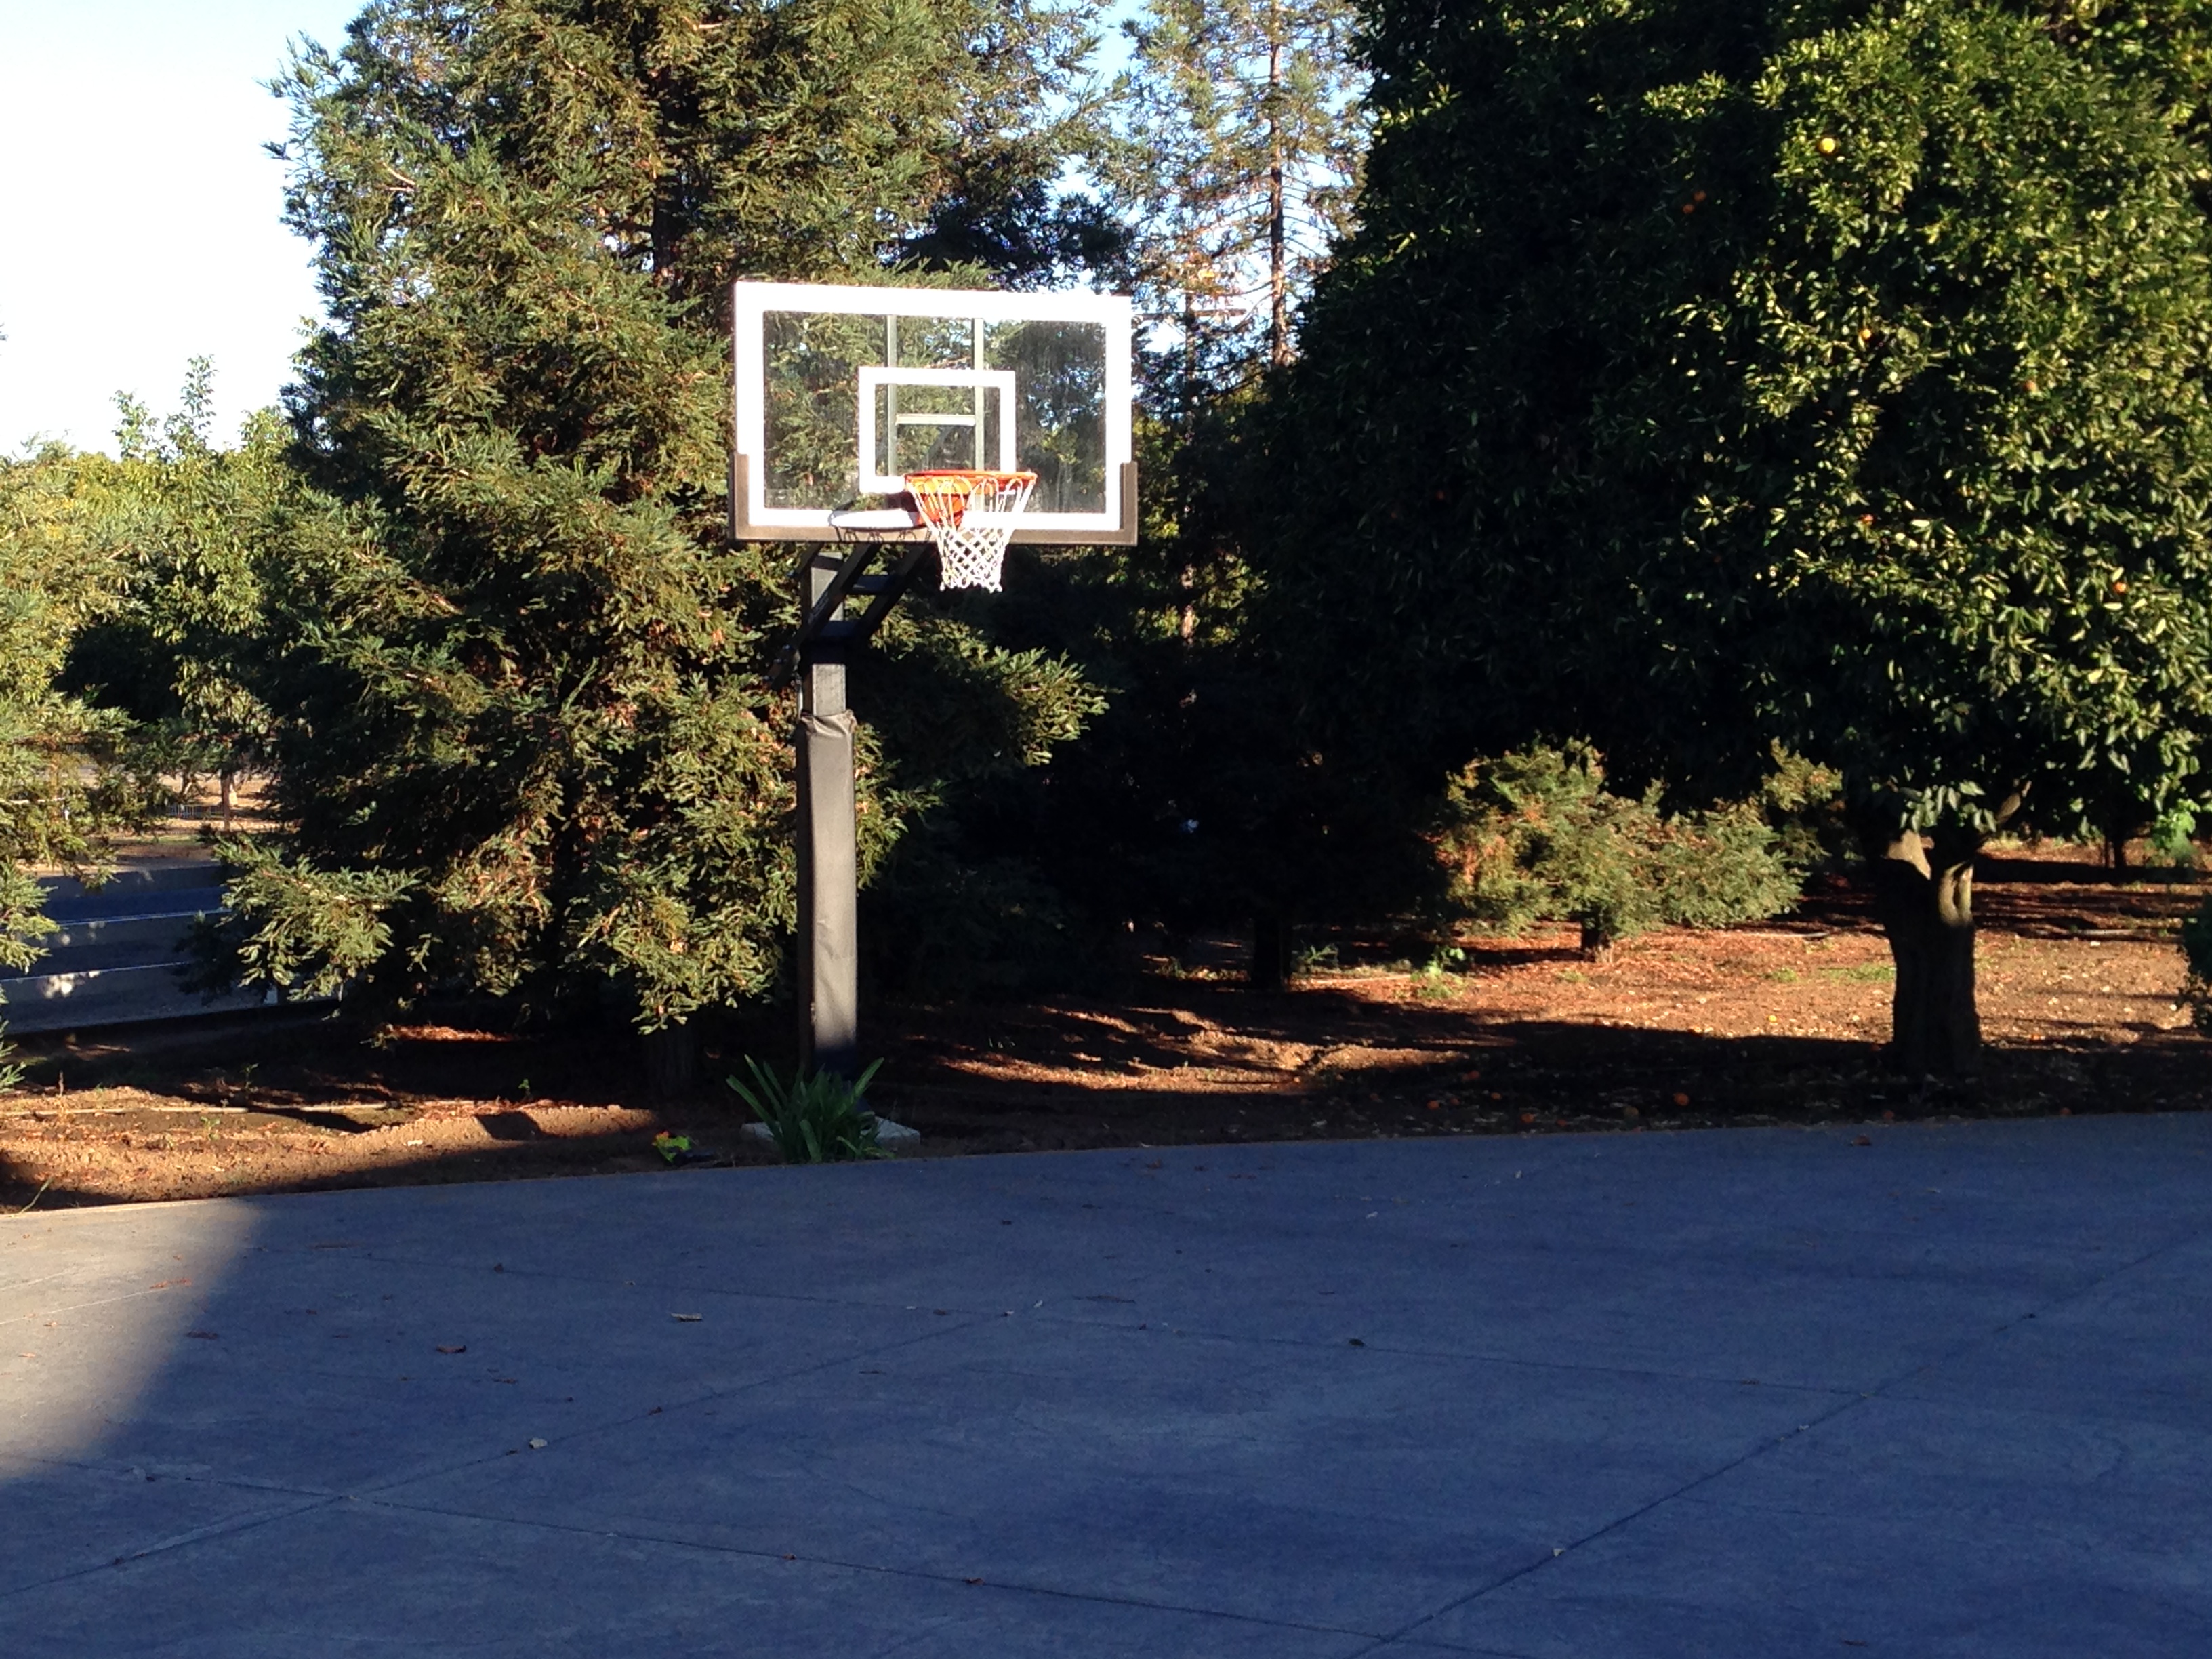 In the background there is Pro Dunk Gold Basketball System in front of the trees.